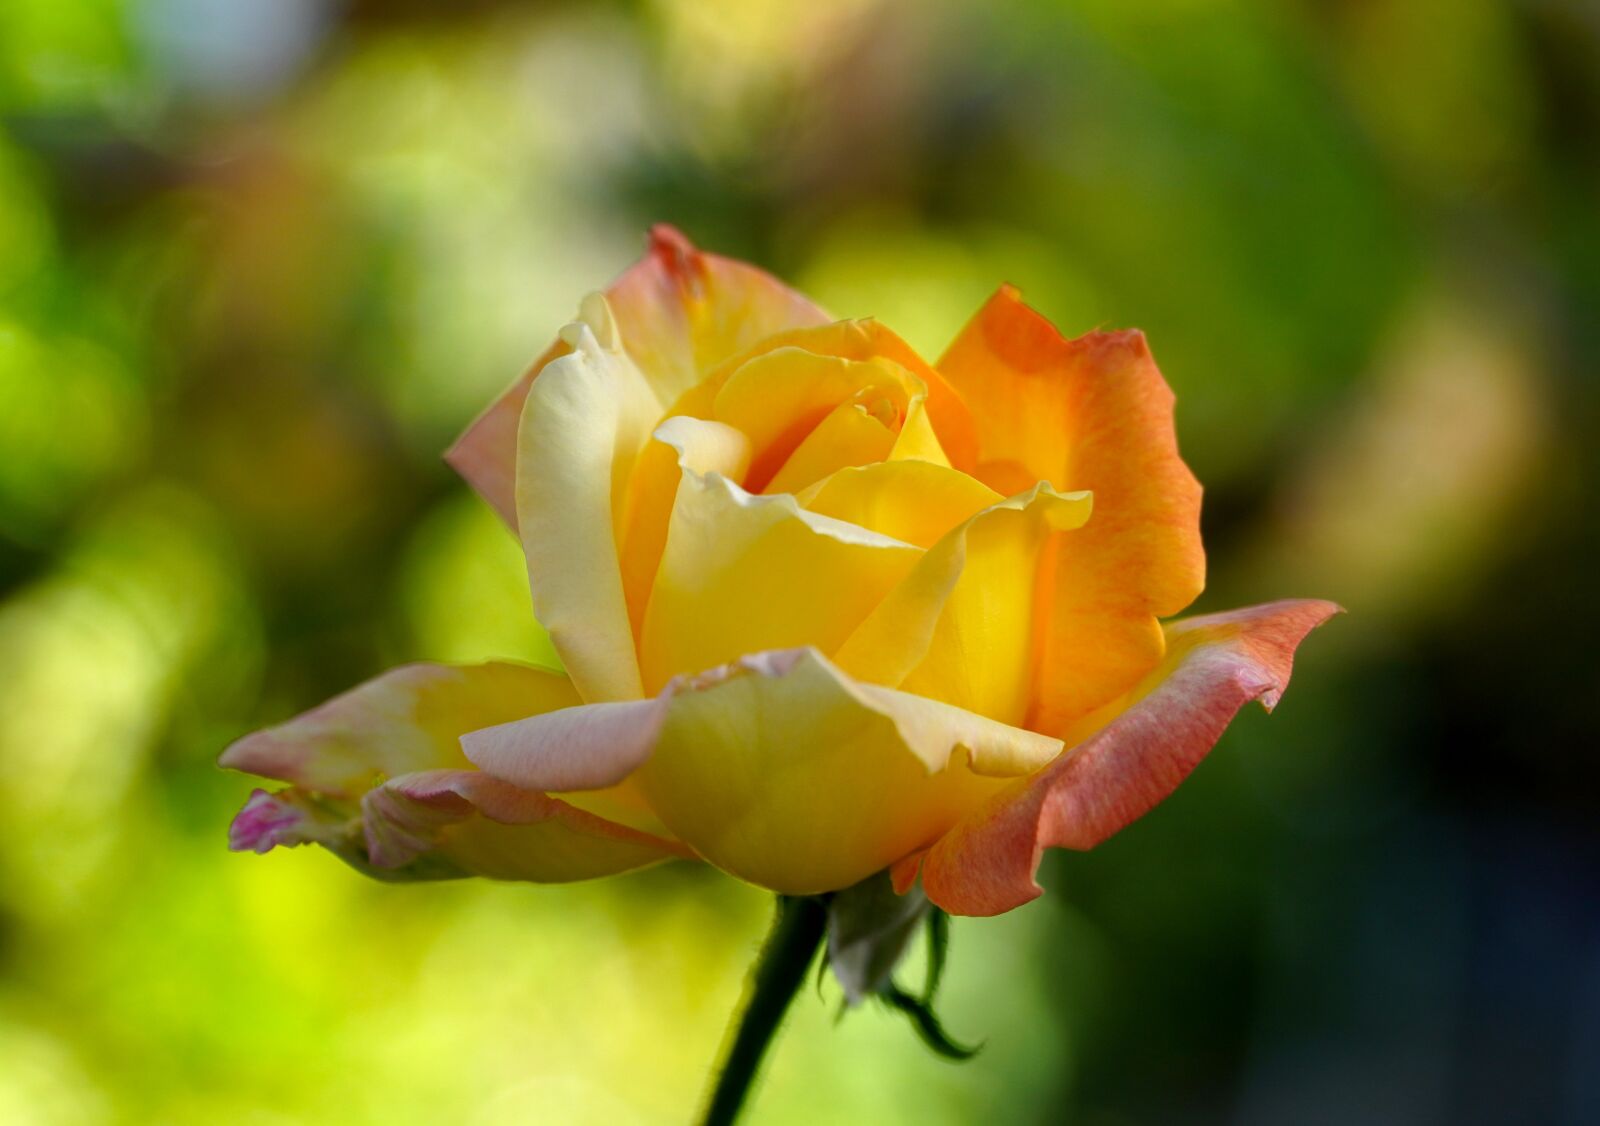 Sony a6400 sample photo. Rose, yellow rose, blossom photography